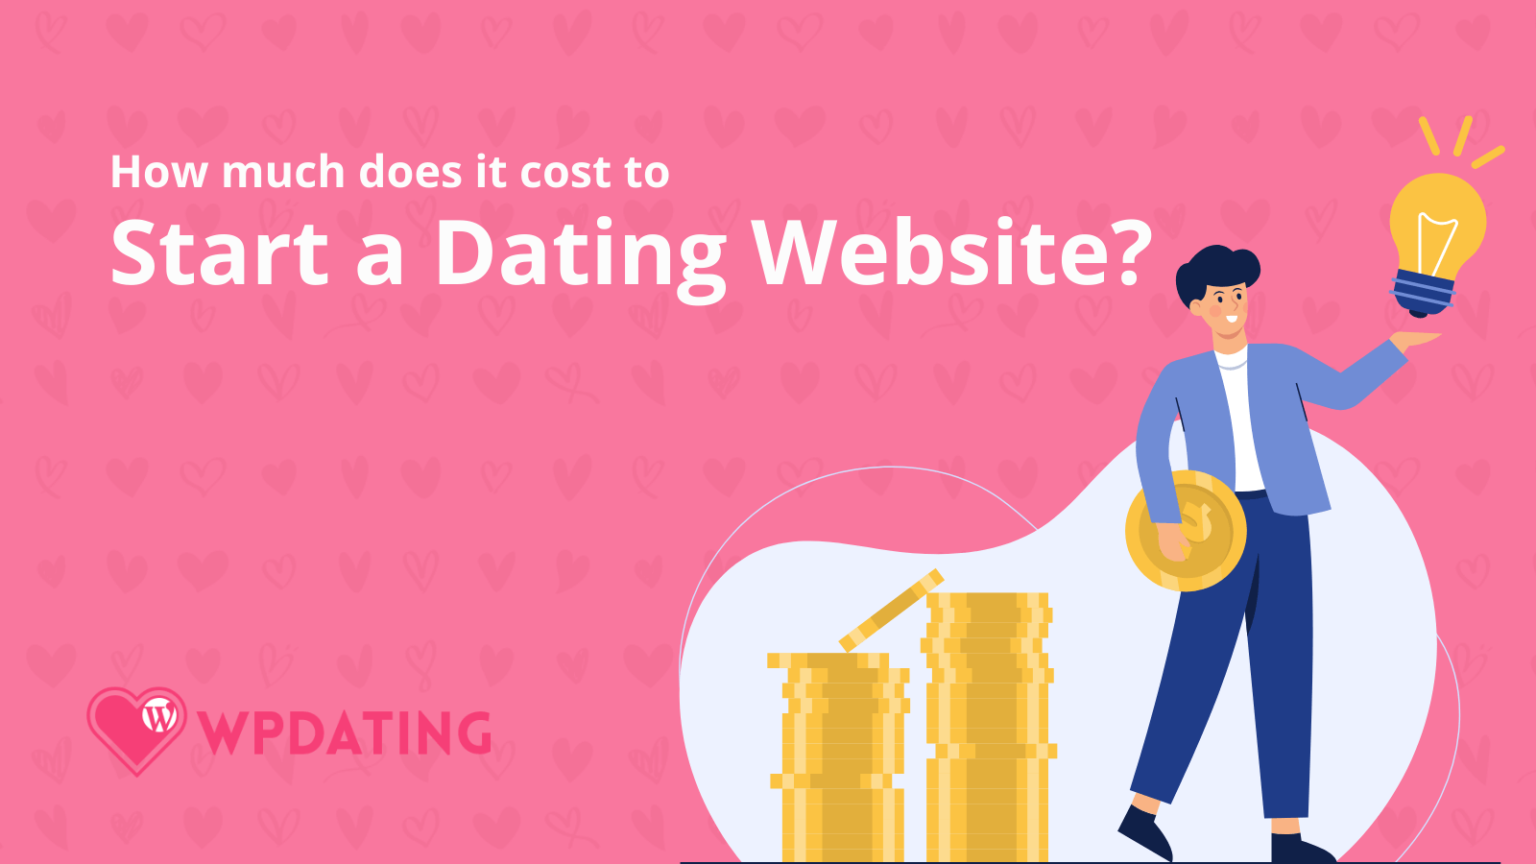 The Best Used Online Dating Websites (2000-2019) - YouTube